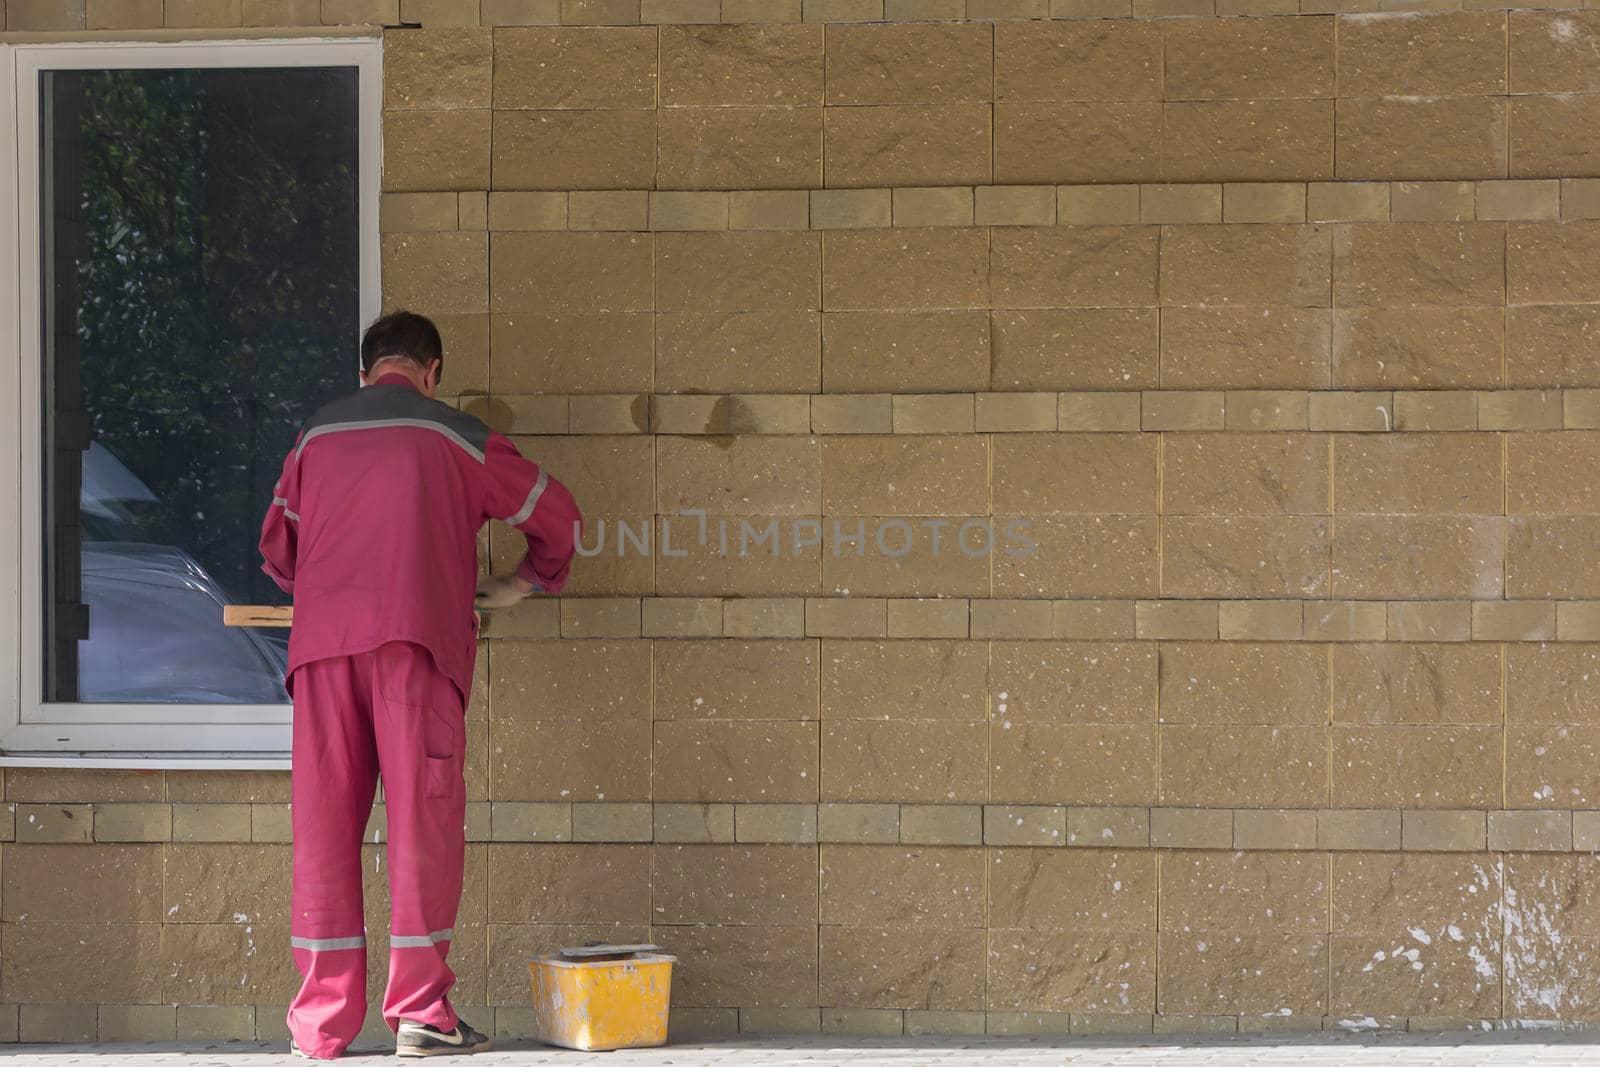 Russia, Bryansk-07/23/2018: a worker plasters the wall of a building. Stock photo.